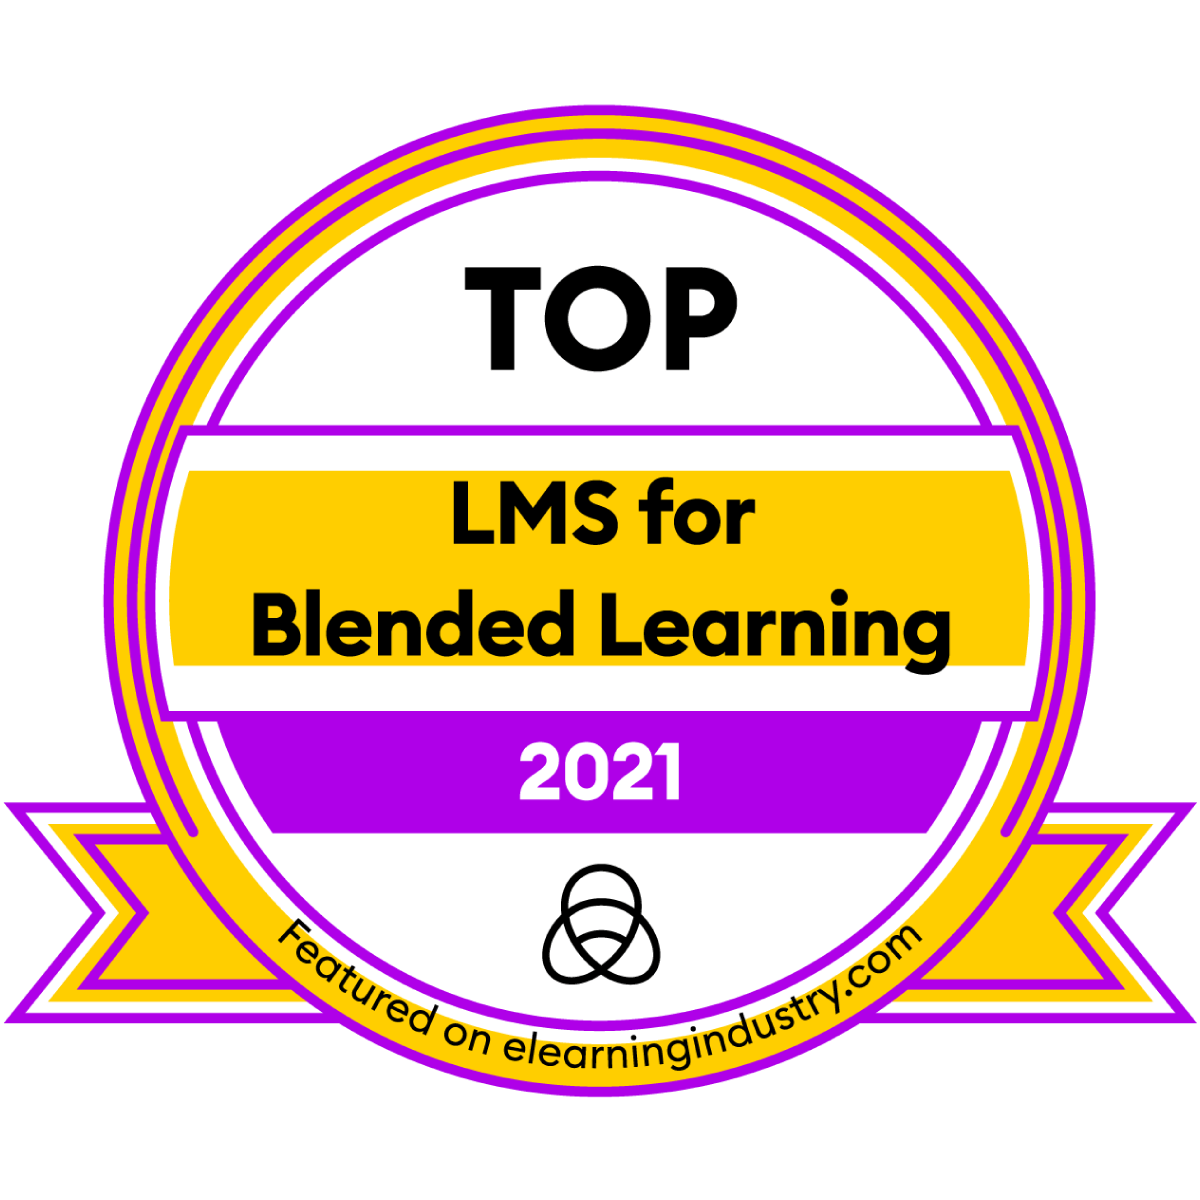 top learning management solution for blended learning